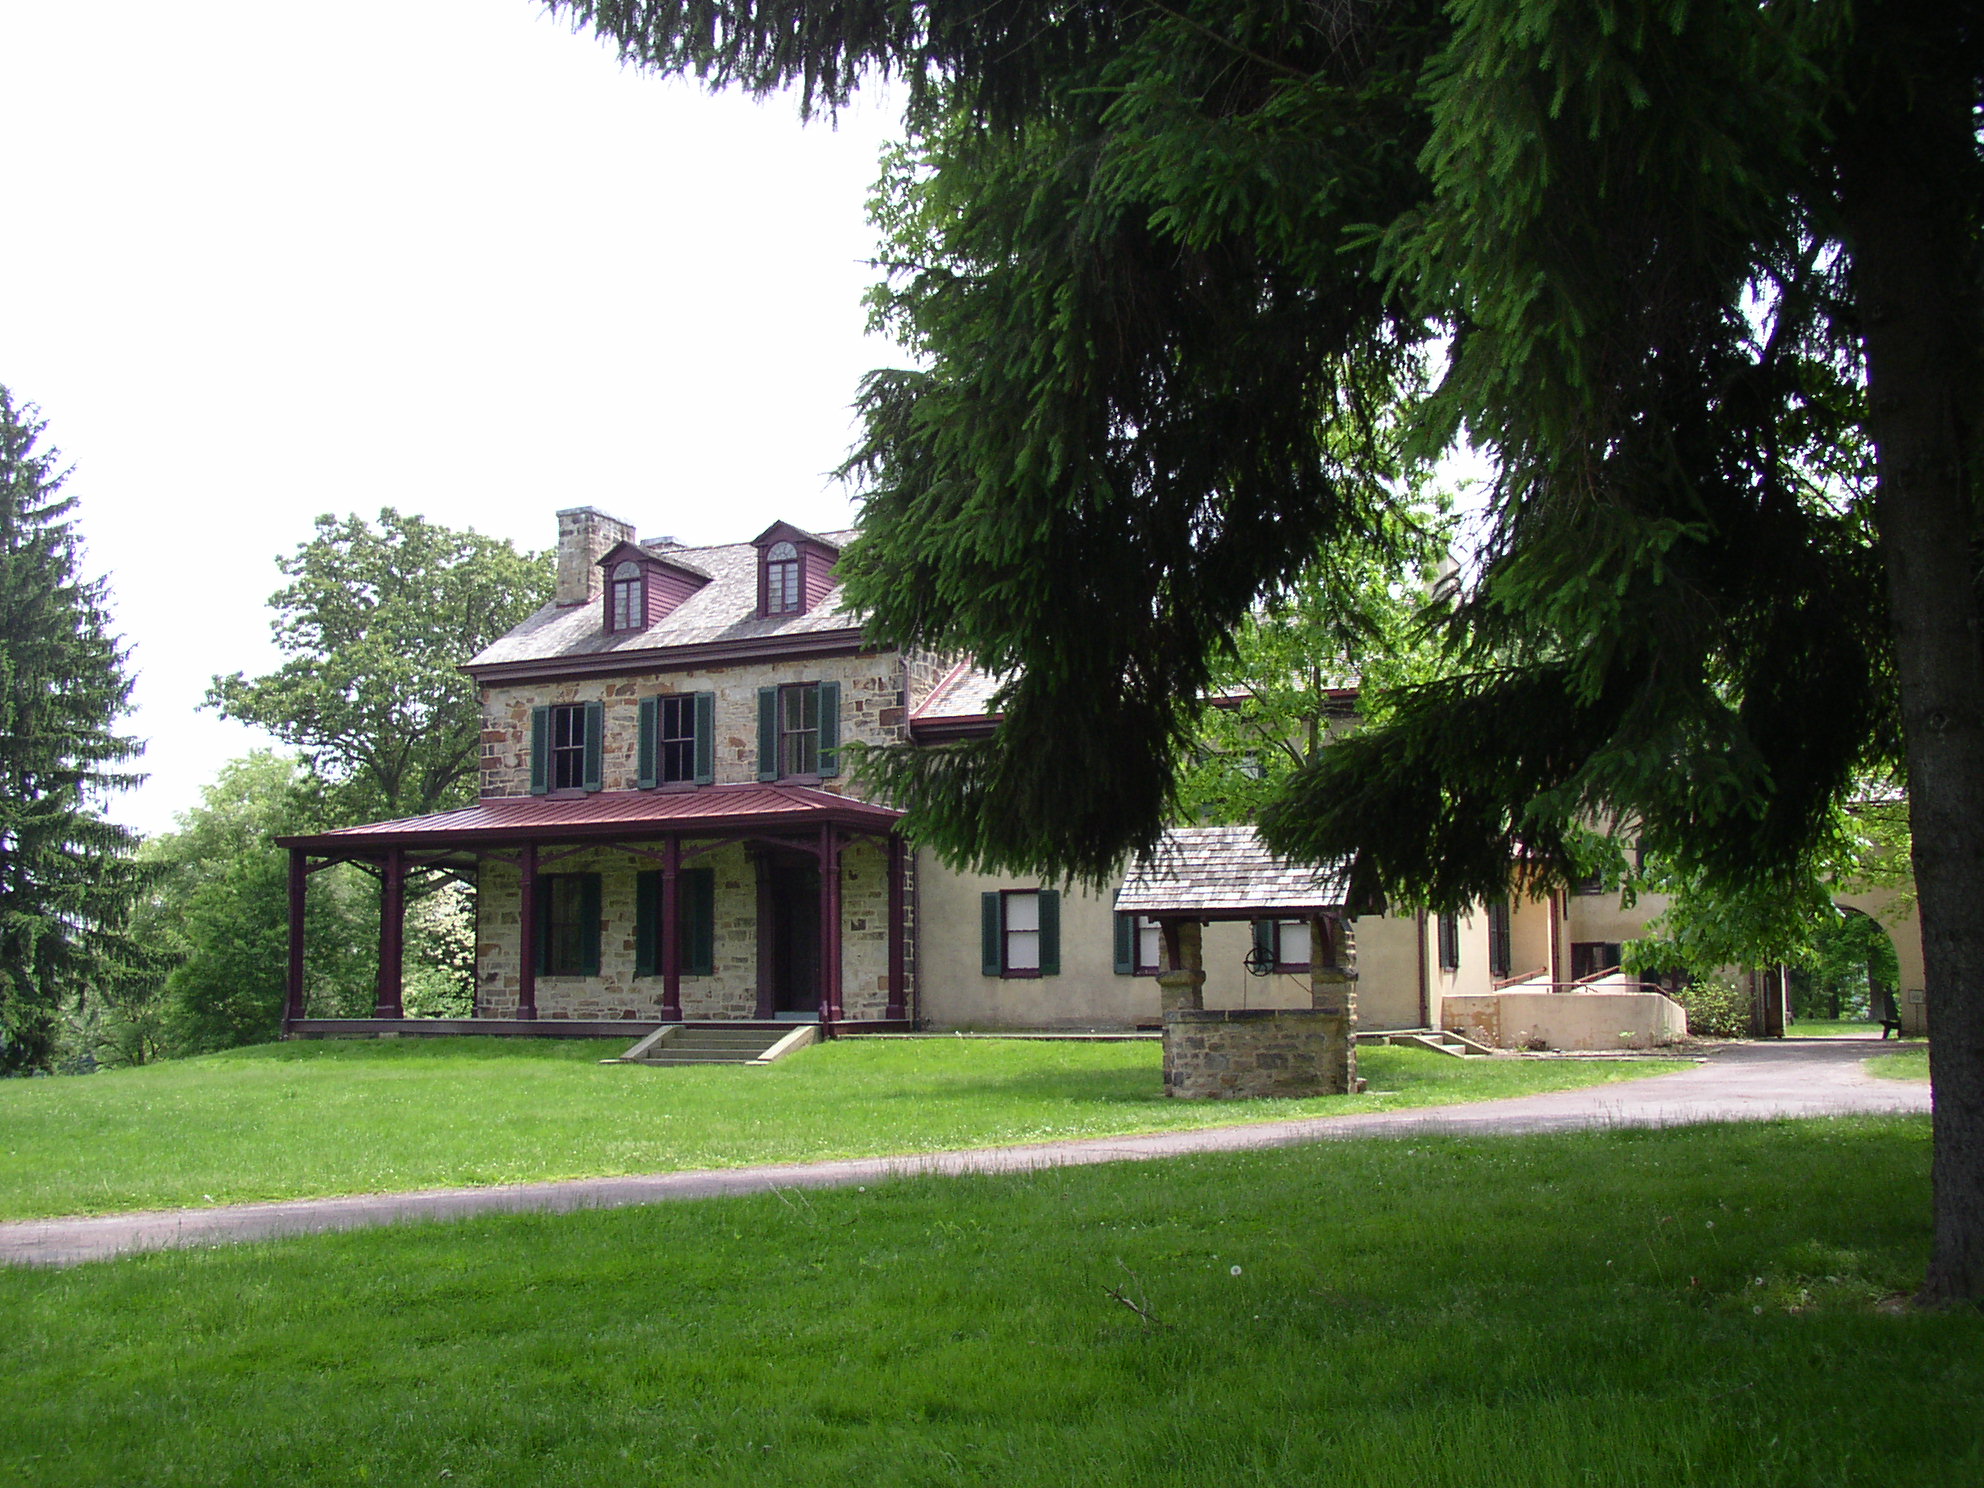 Gallatin House - Stone House and well